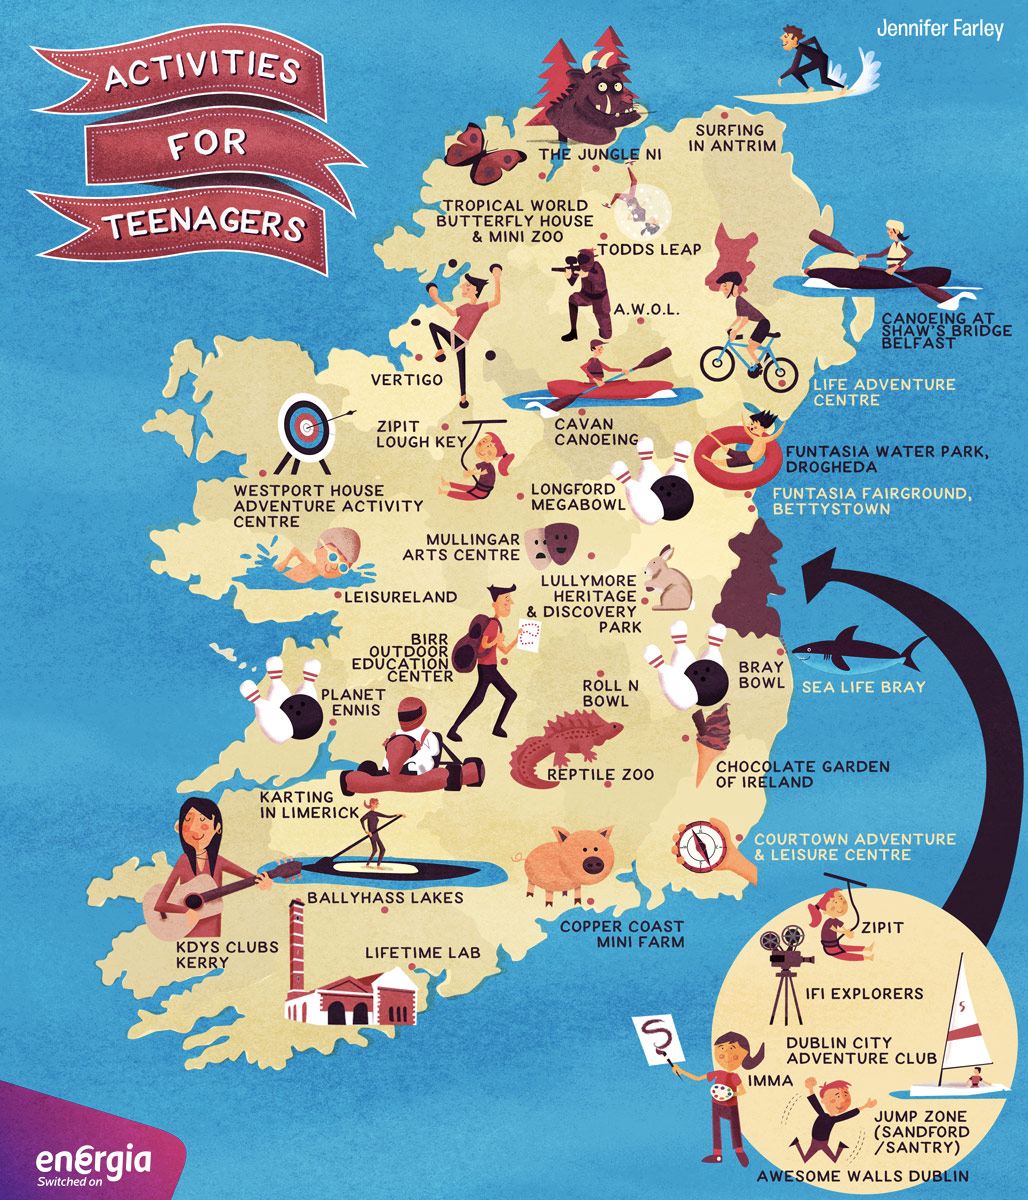 Map Of Ireland Activites For Teenagers by Jennifer Farley